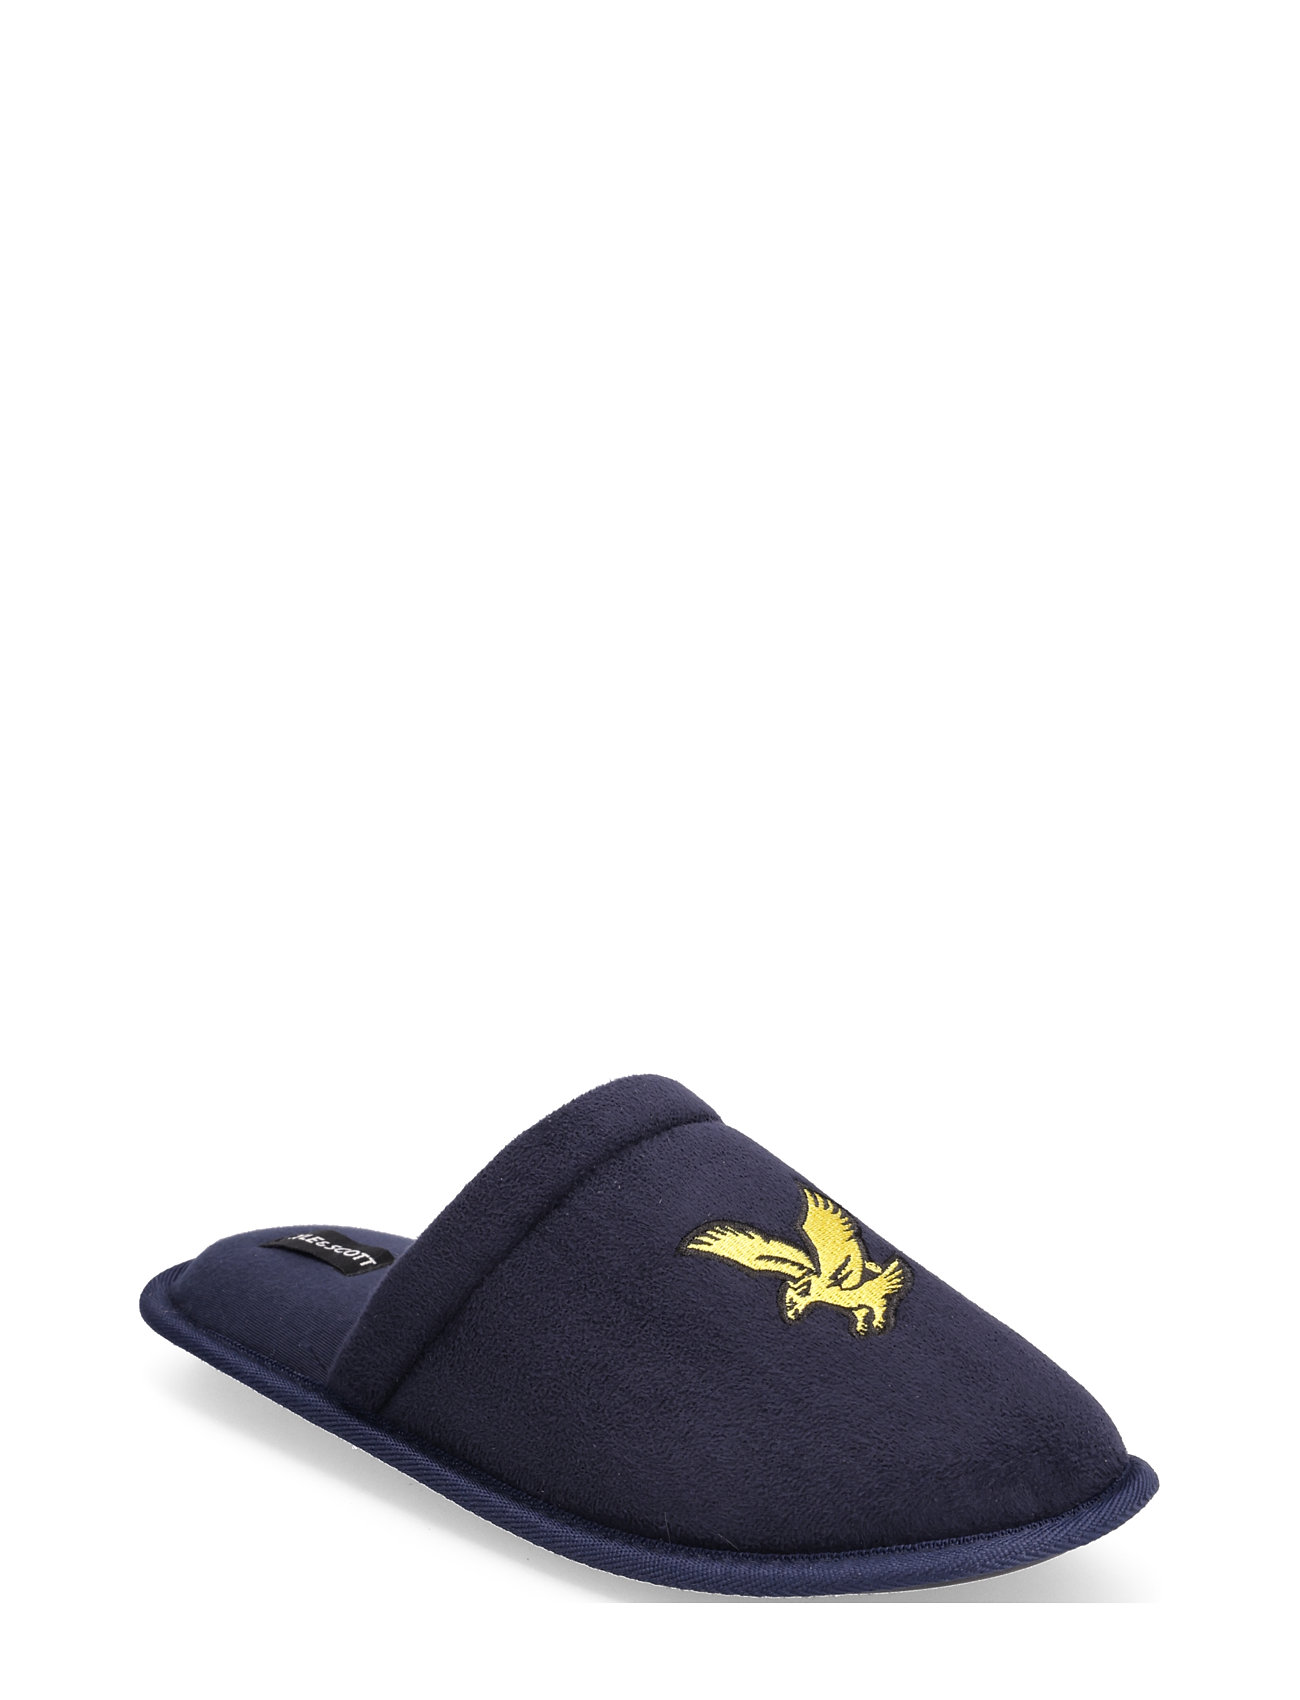 Colin Slippers Tofflor Navy Lyle & Scott